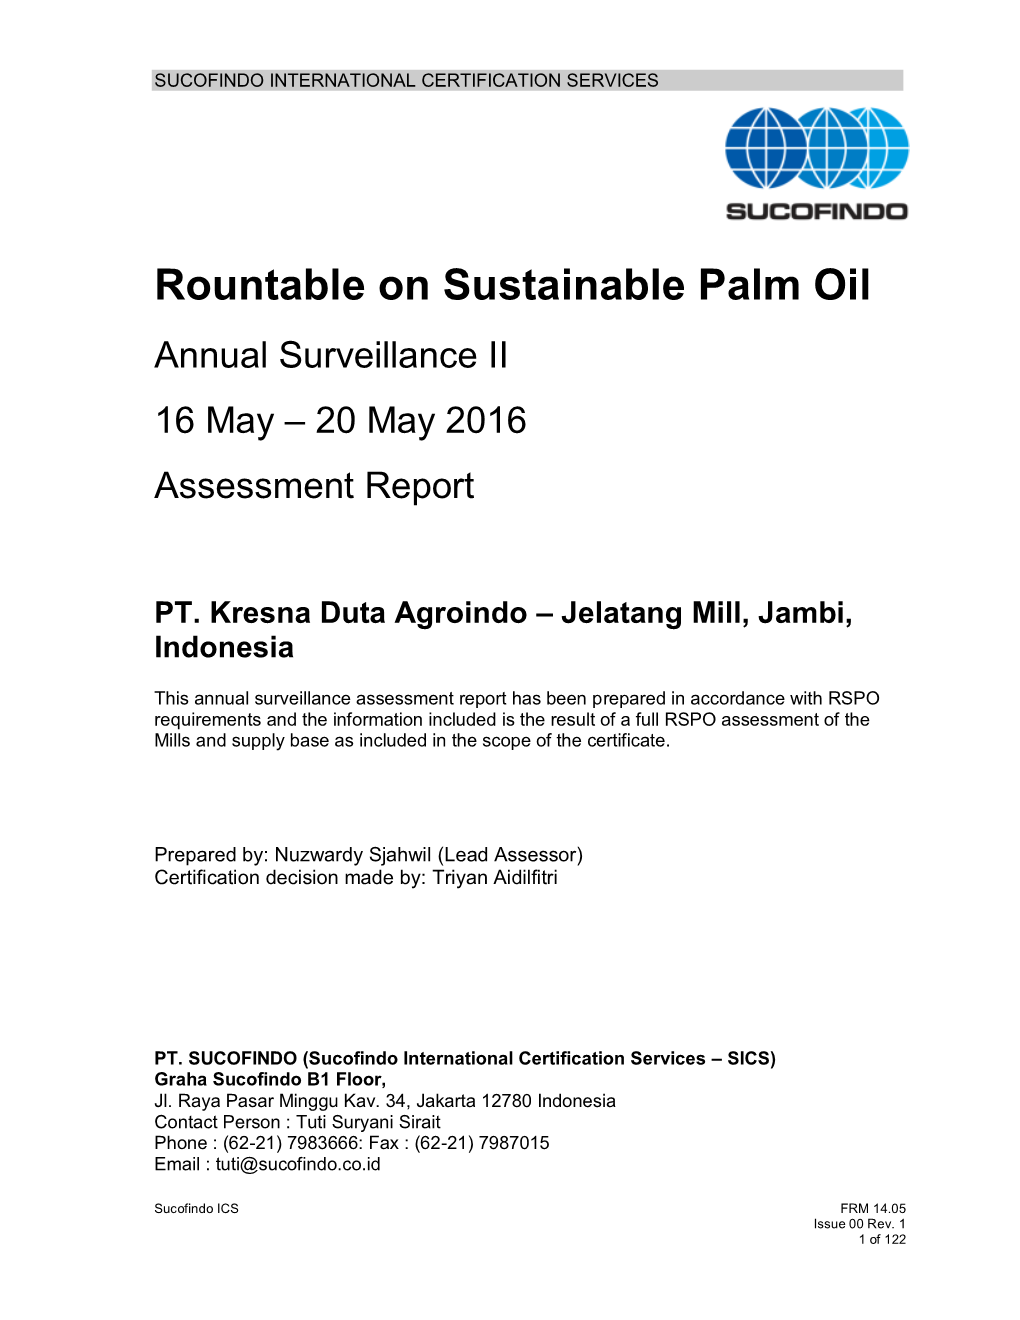 Rountable on Sustainable Palm Oil Annual Surveillance II 16 May – 20 May 2016 Assessment Report